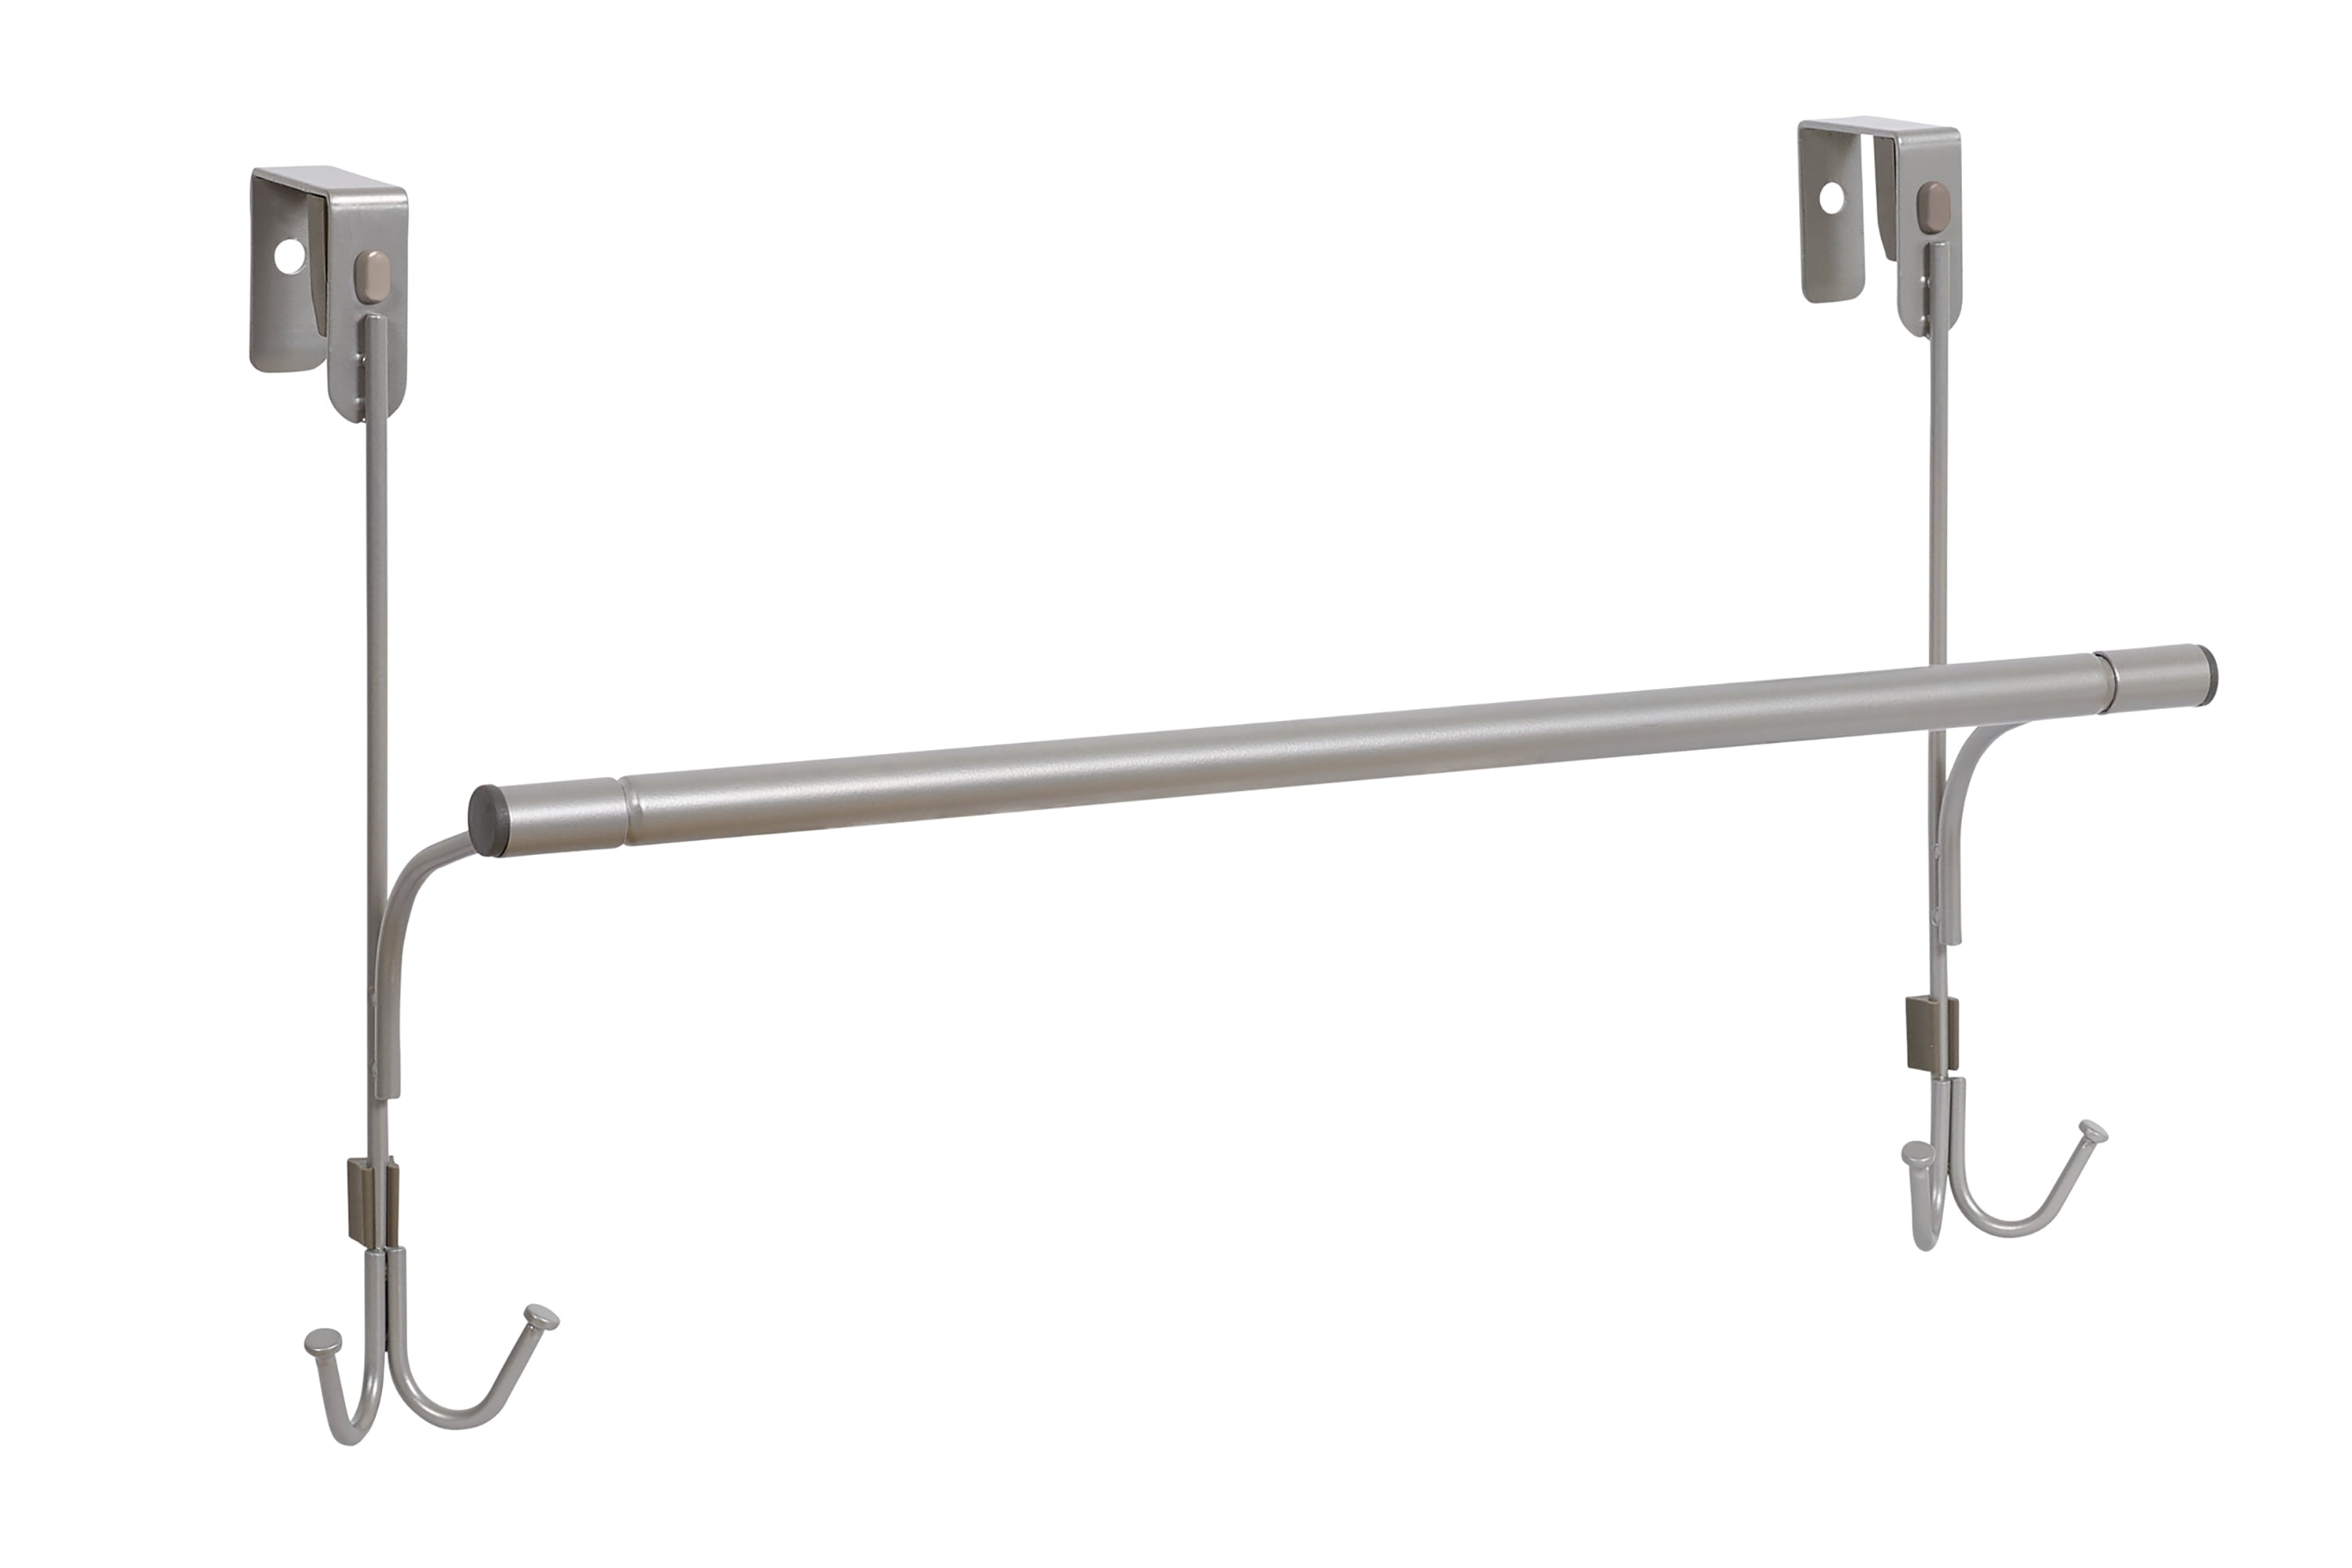 Expandable Hooks Rack for Kitchen Over the Door Hanger BigBig Home Adjustable 6 Hooks 13 Inch Organizer Rack With No Hole Drilling Brushed Nickel Stainless Steel.